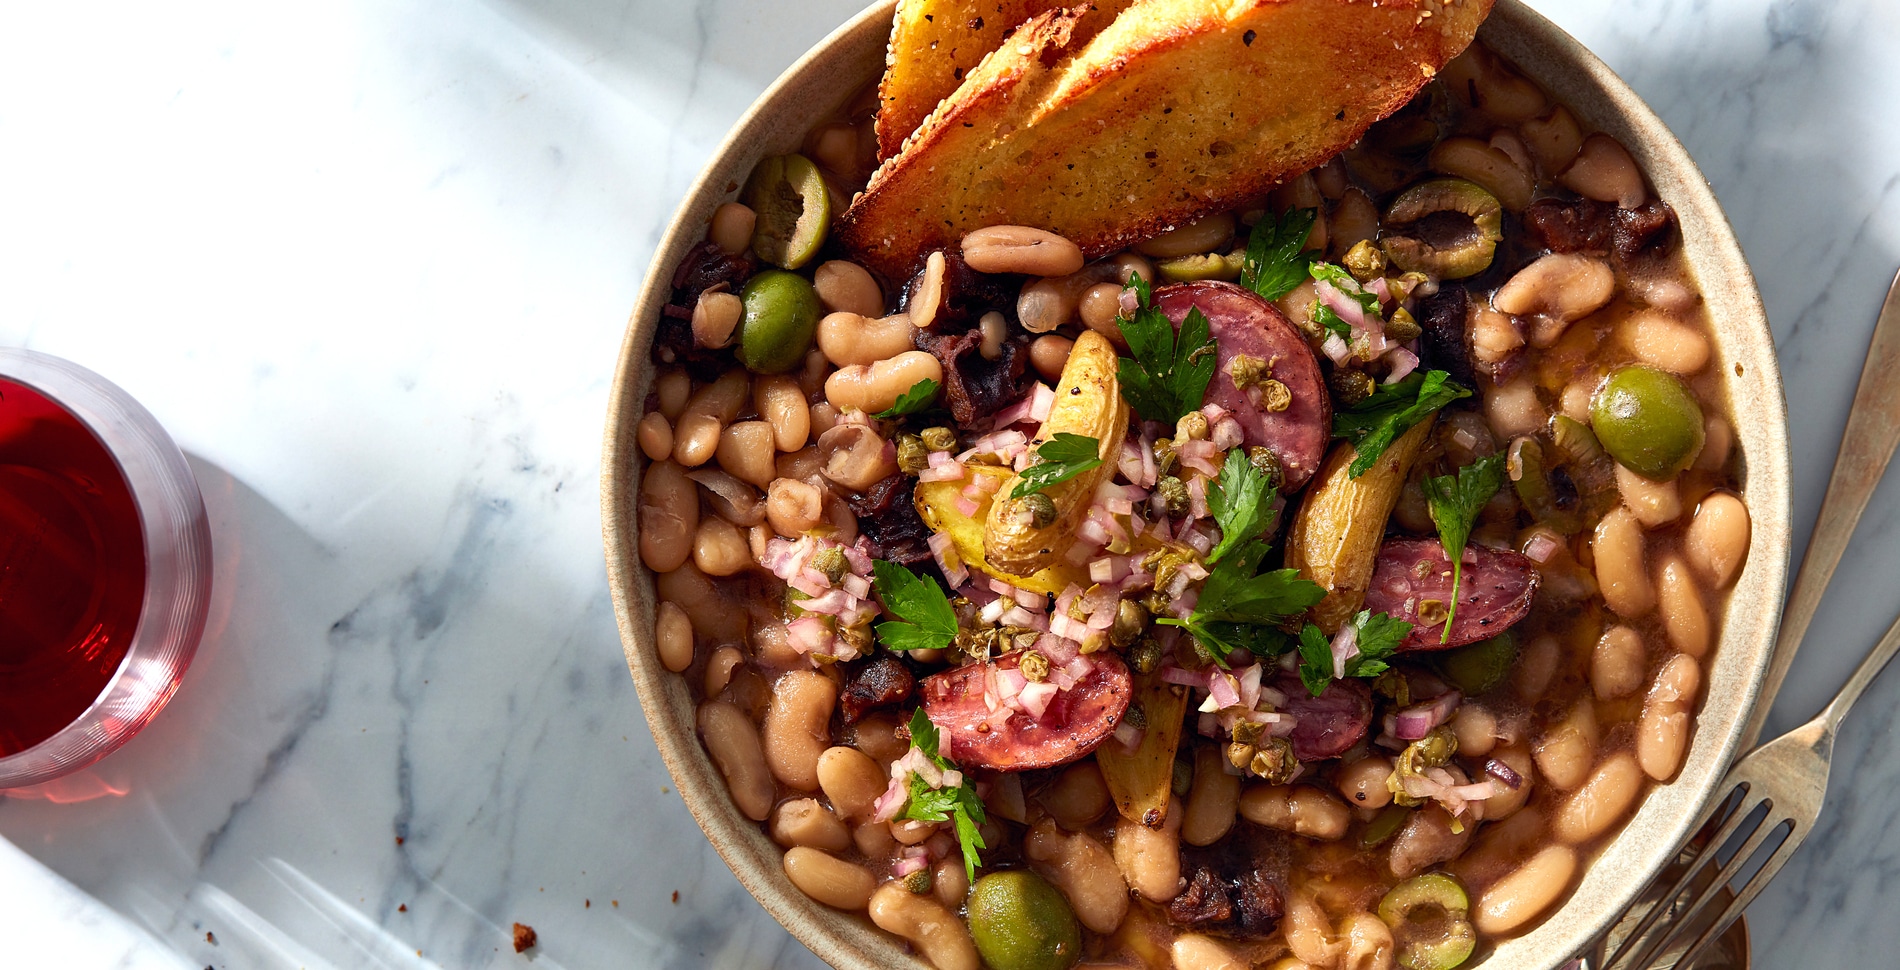 Are All Canned Beans the Same? A Nutritionist Weighs In